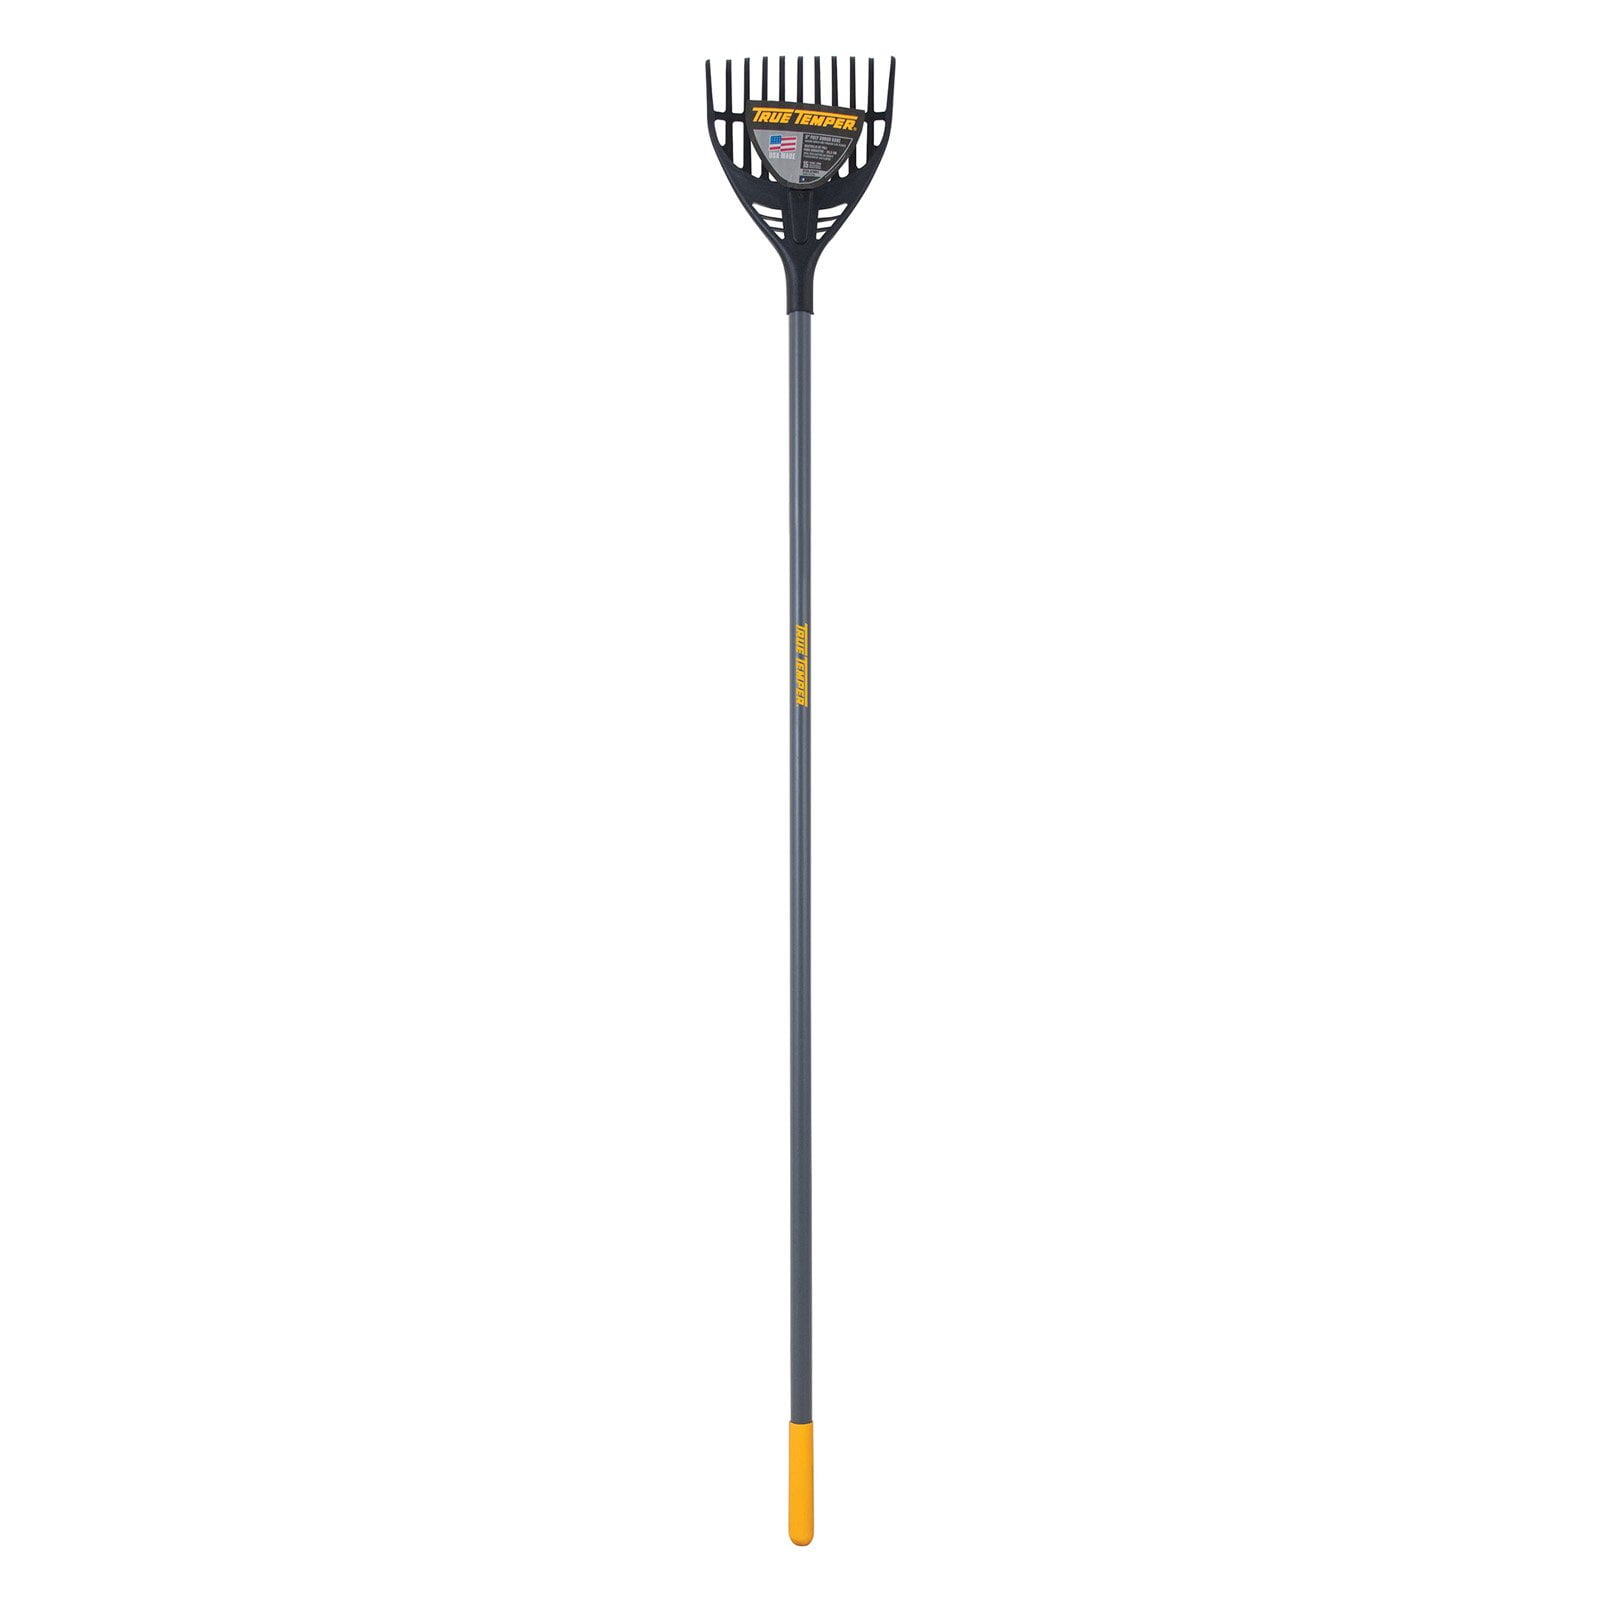 Impact Products LBH18 Bucketless Mop Handle 3-3/4"Wx18"Lx59-1/2"H 